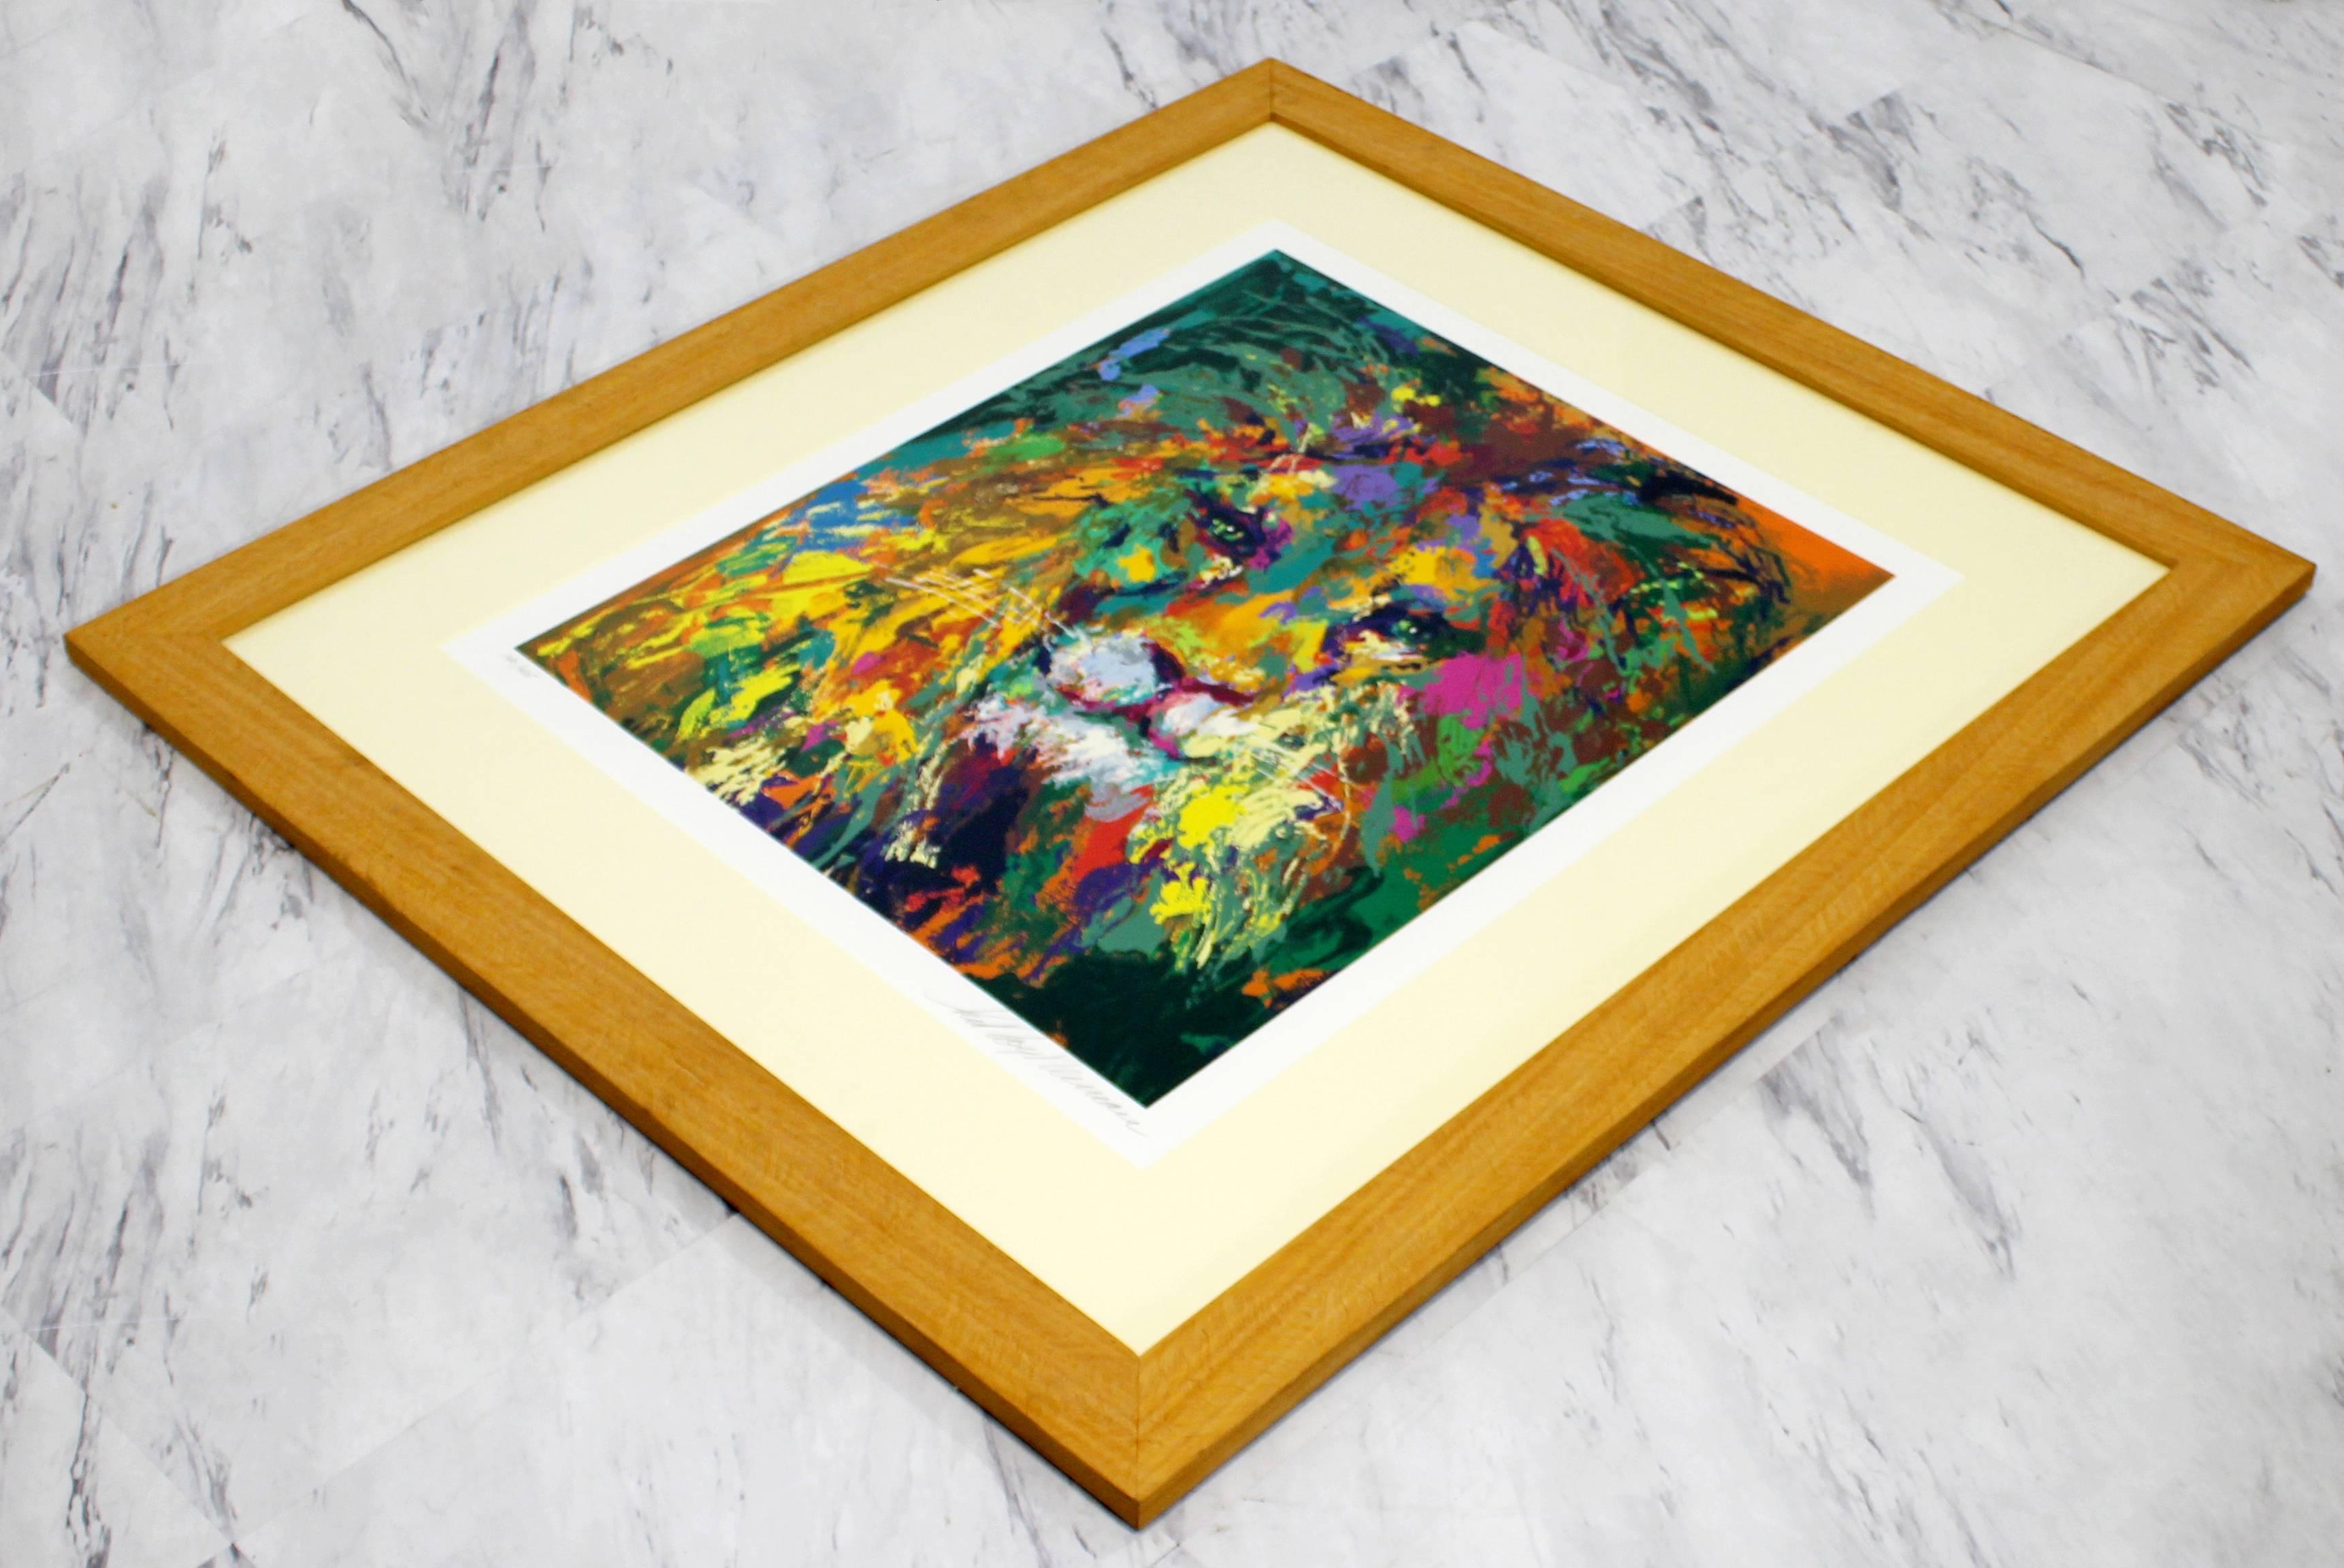 For your consideration is a fabulous serigraph of Leroy Neiman's Portrait of the Lion, signed and numbered by the artist, 140/425. In excellent condition. The dimensions of the frame are 36